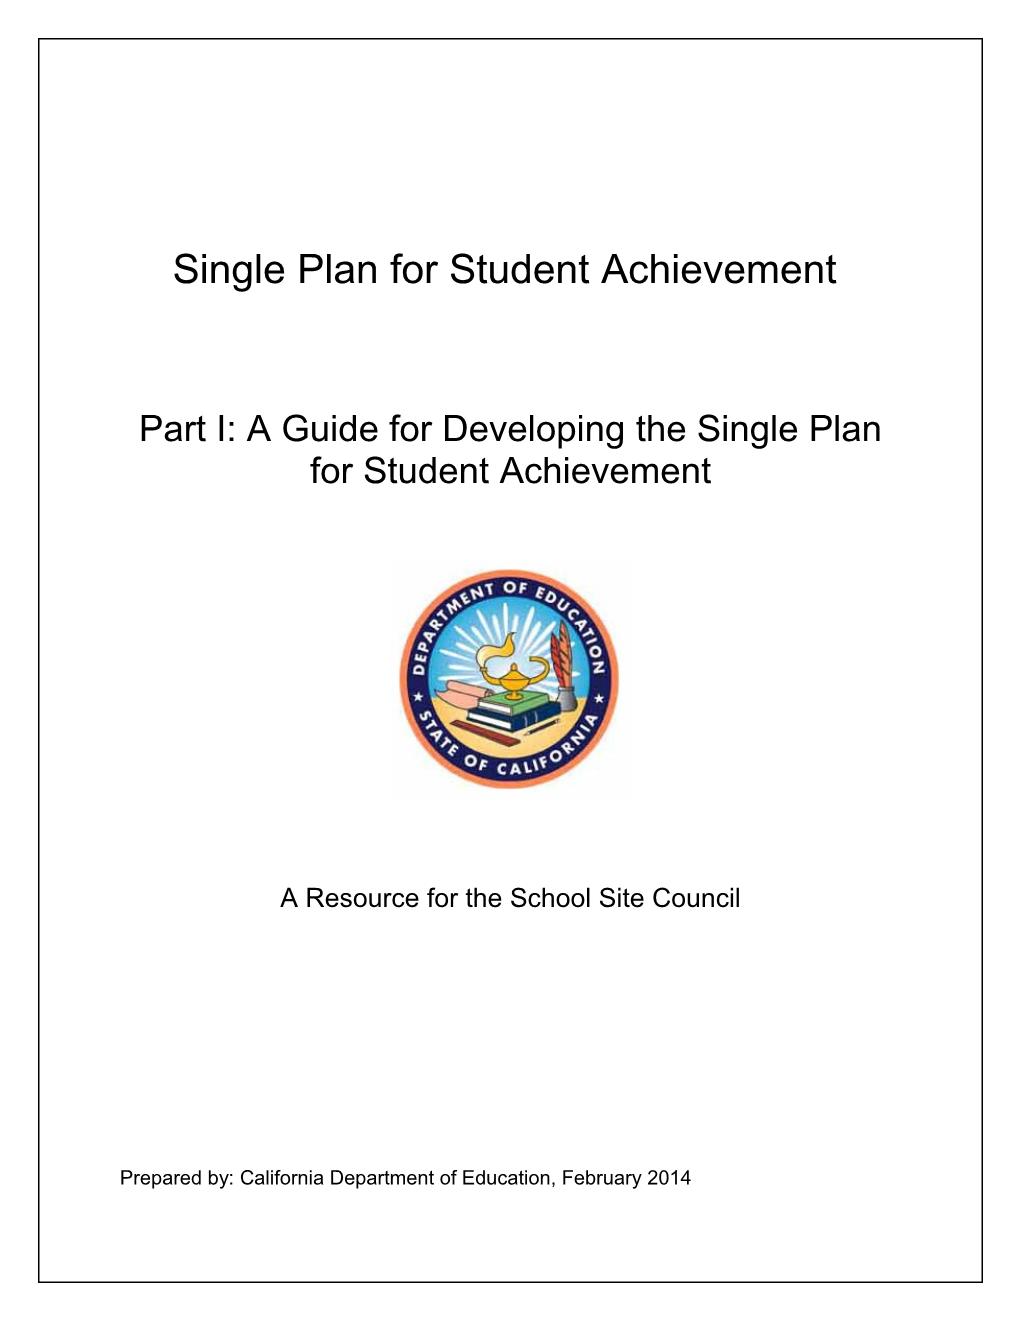 Single Plan for Student Achievement-Part I - Local Educational Agency Plan (CA Dept Of